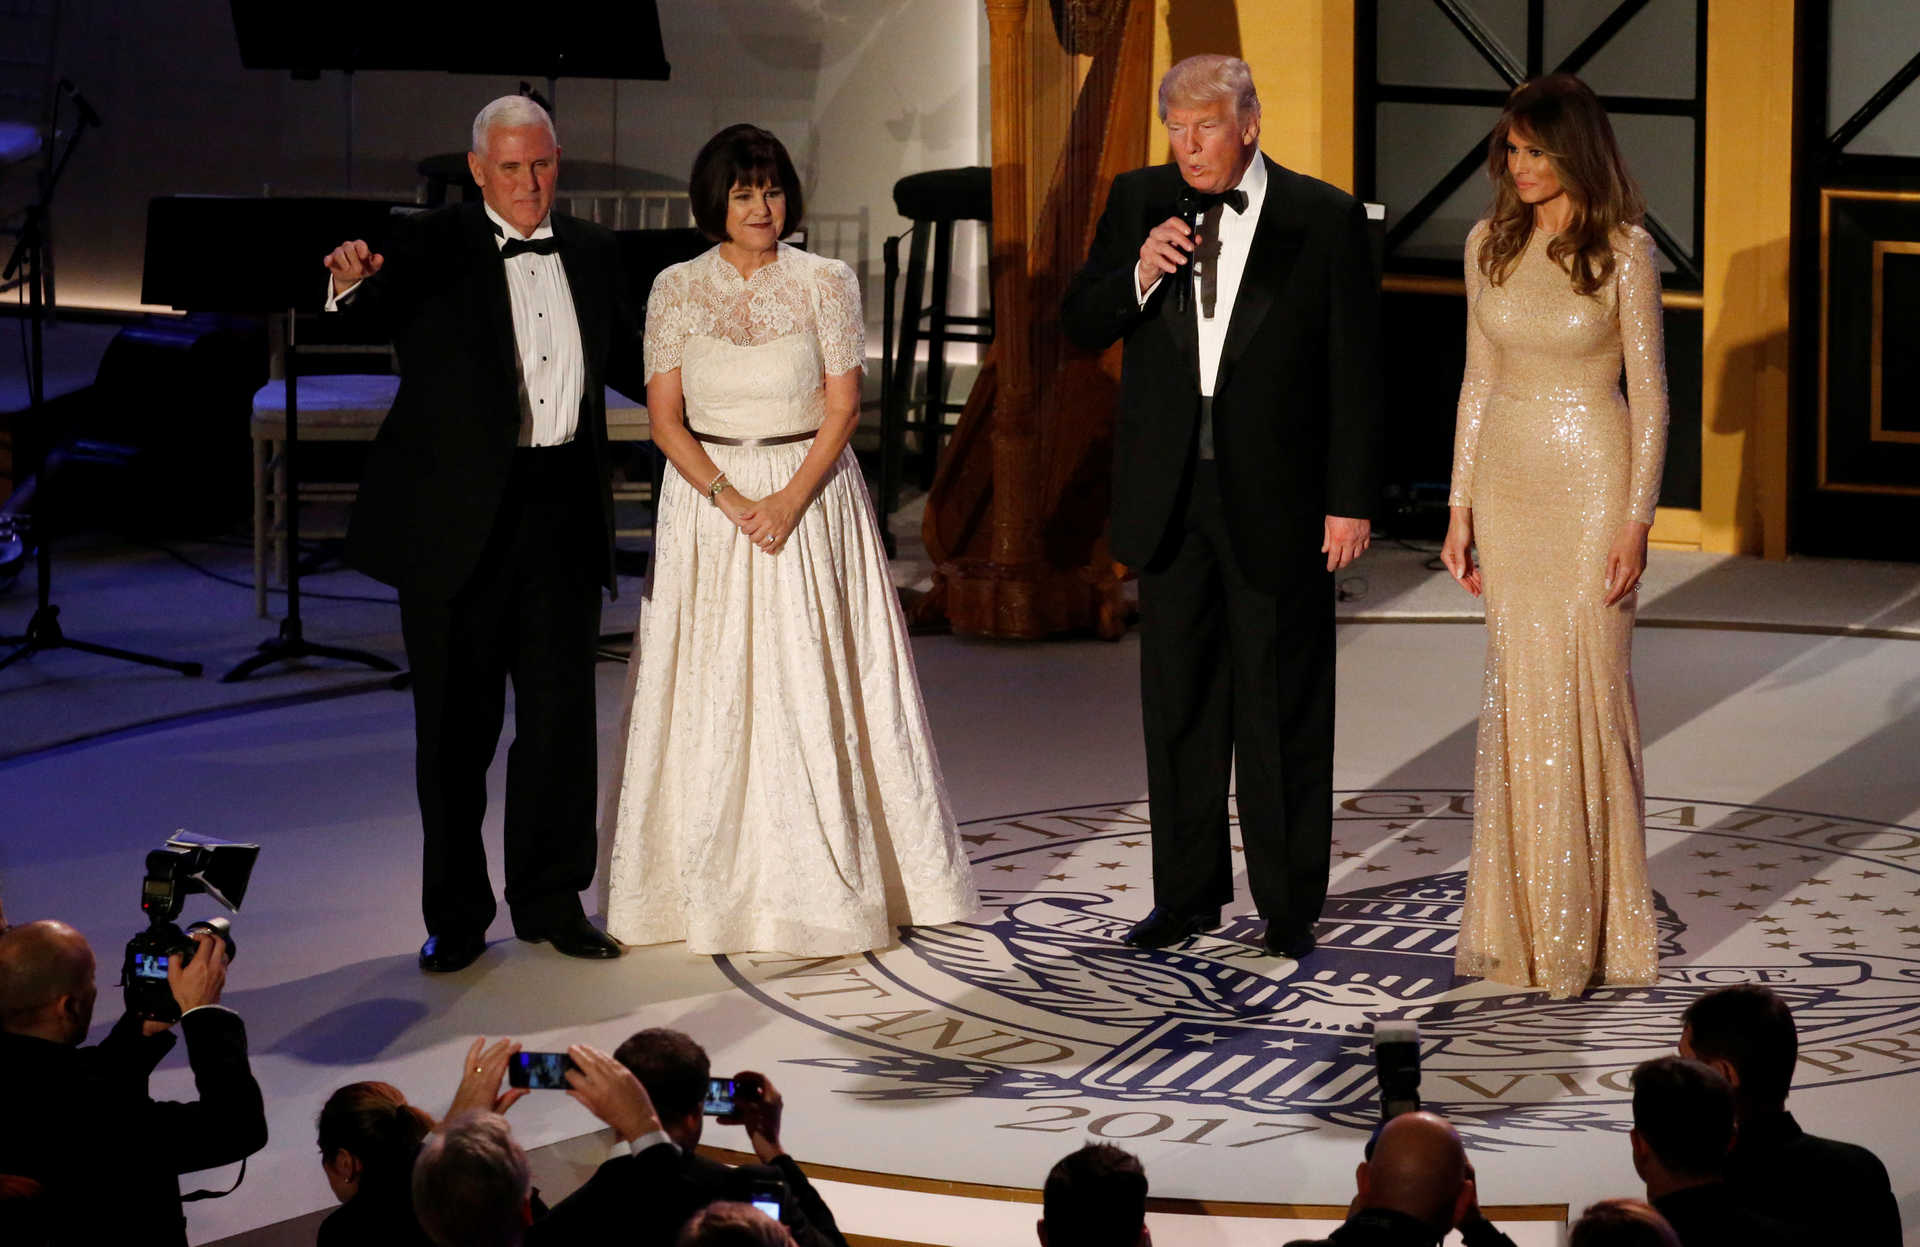 Trump and his wife take the stage with Pence and his wife Karen at a pre-inauguration candlelight dinner with supporters at Union Station in Washington